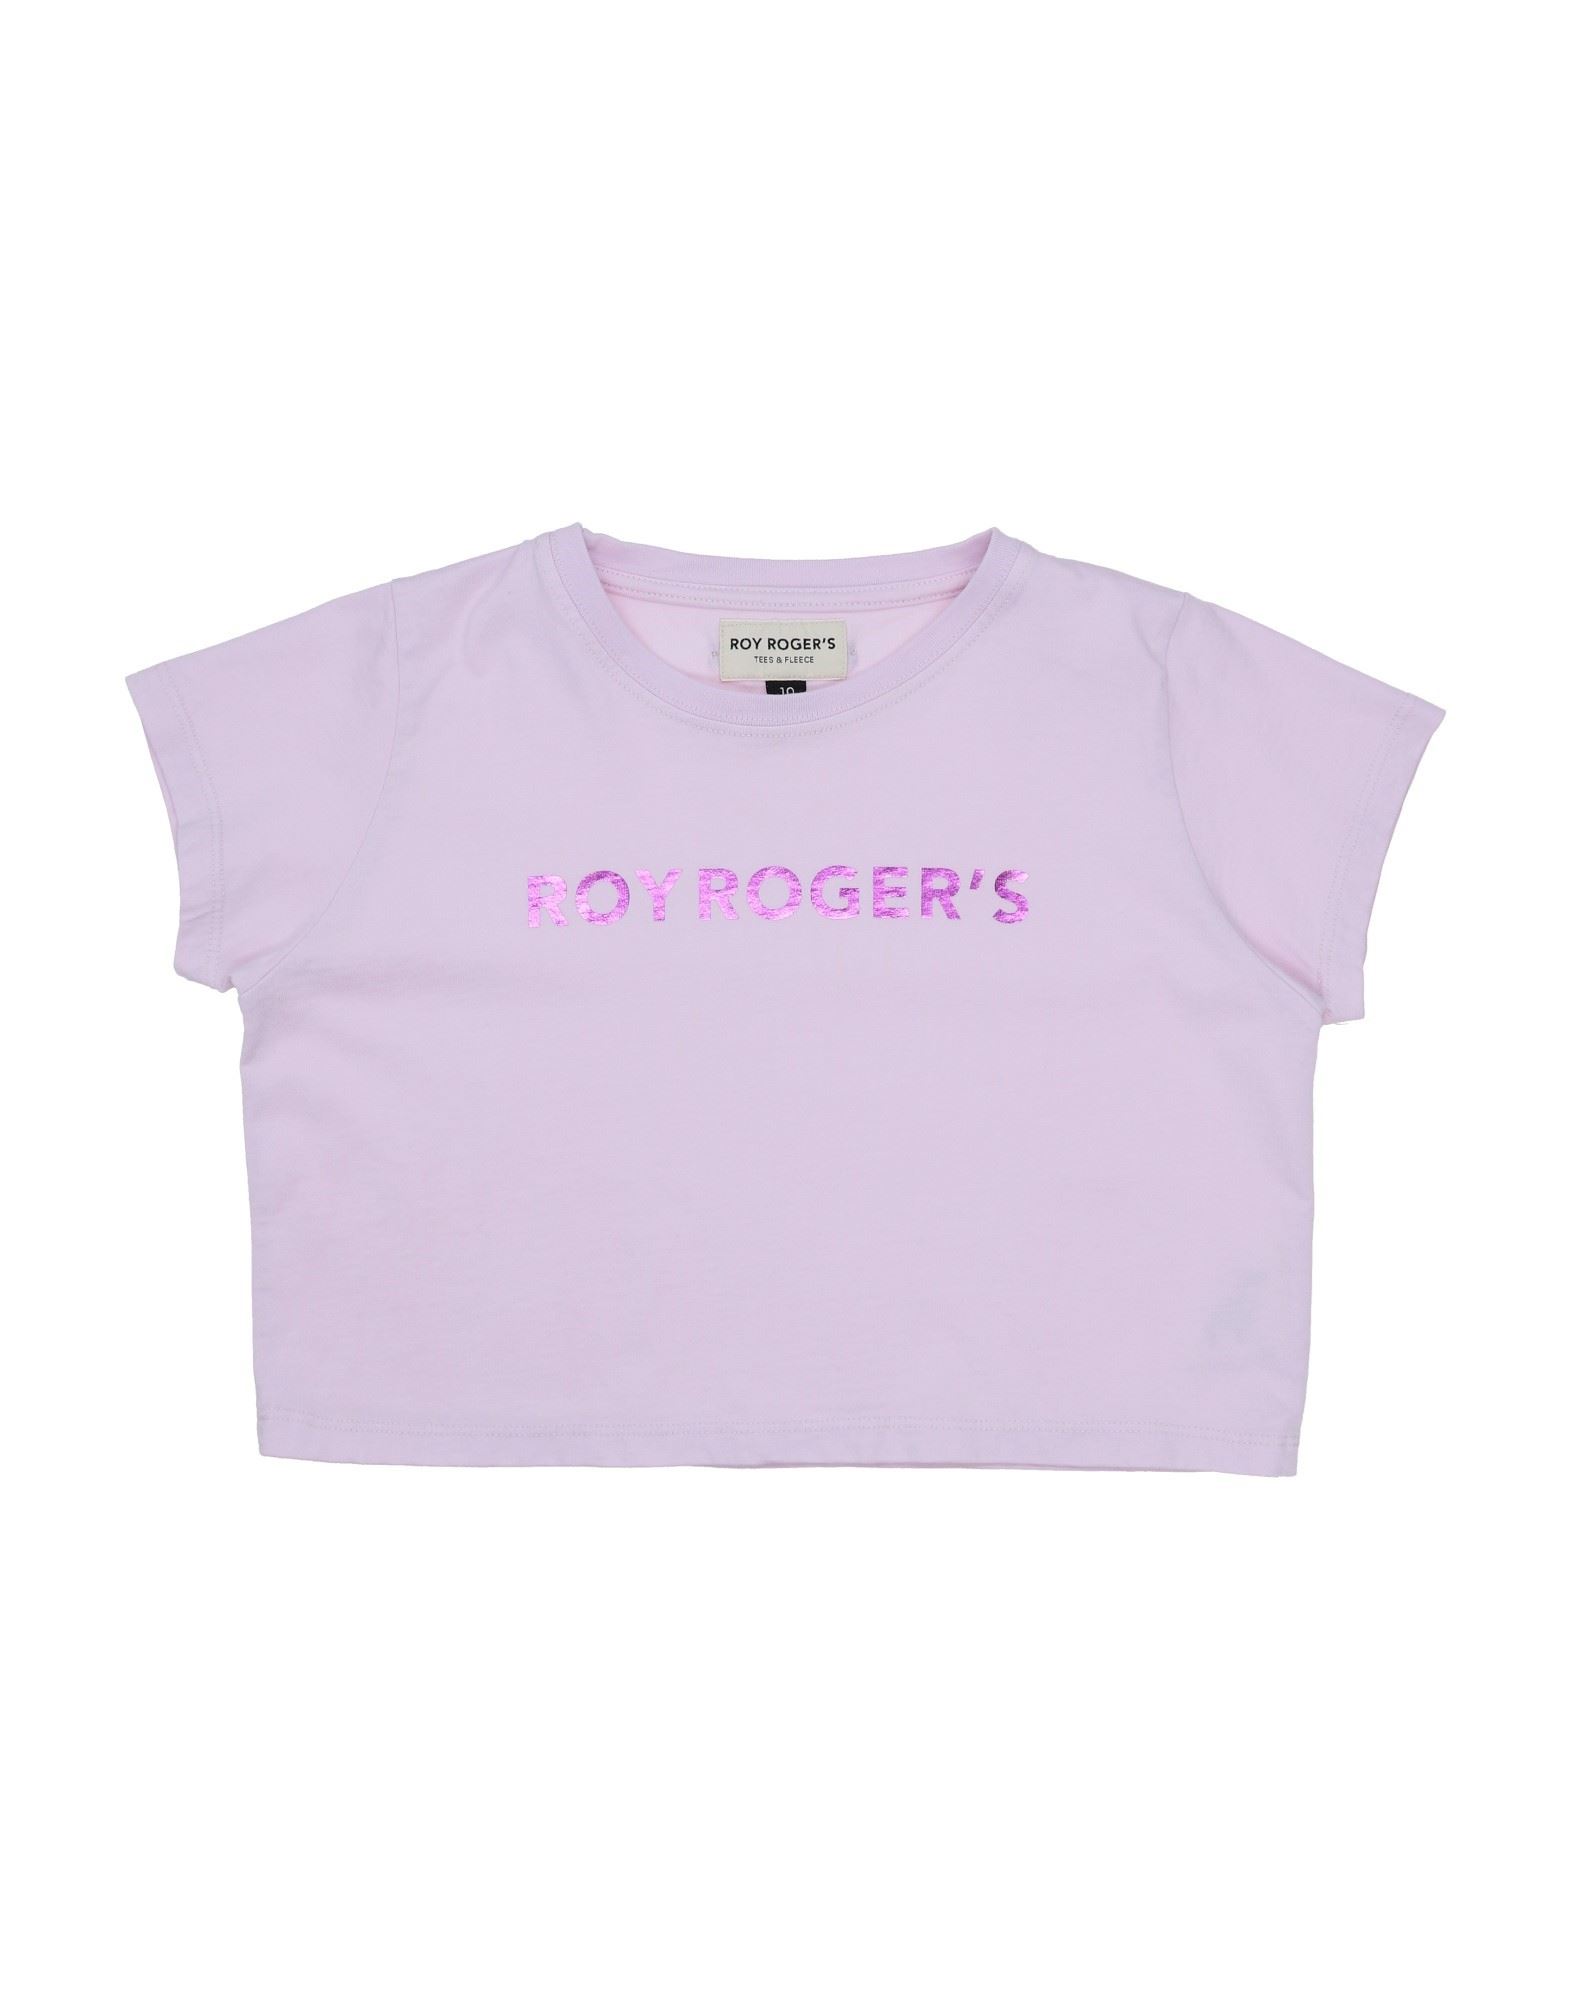 Roy Rogers Kids' Roÿ Roger's Toddler Girl T-shirt Light Pink Size 6 Cotton